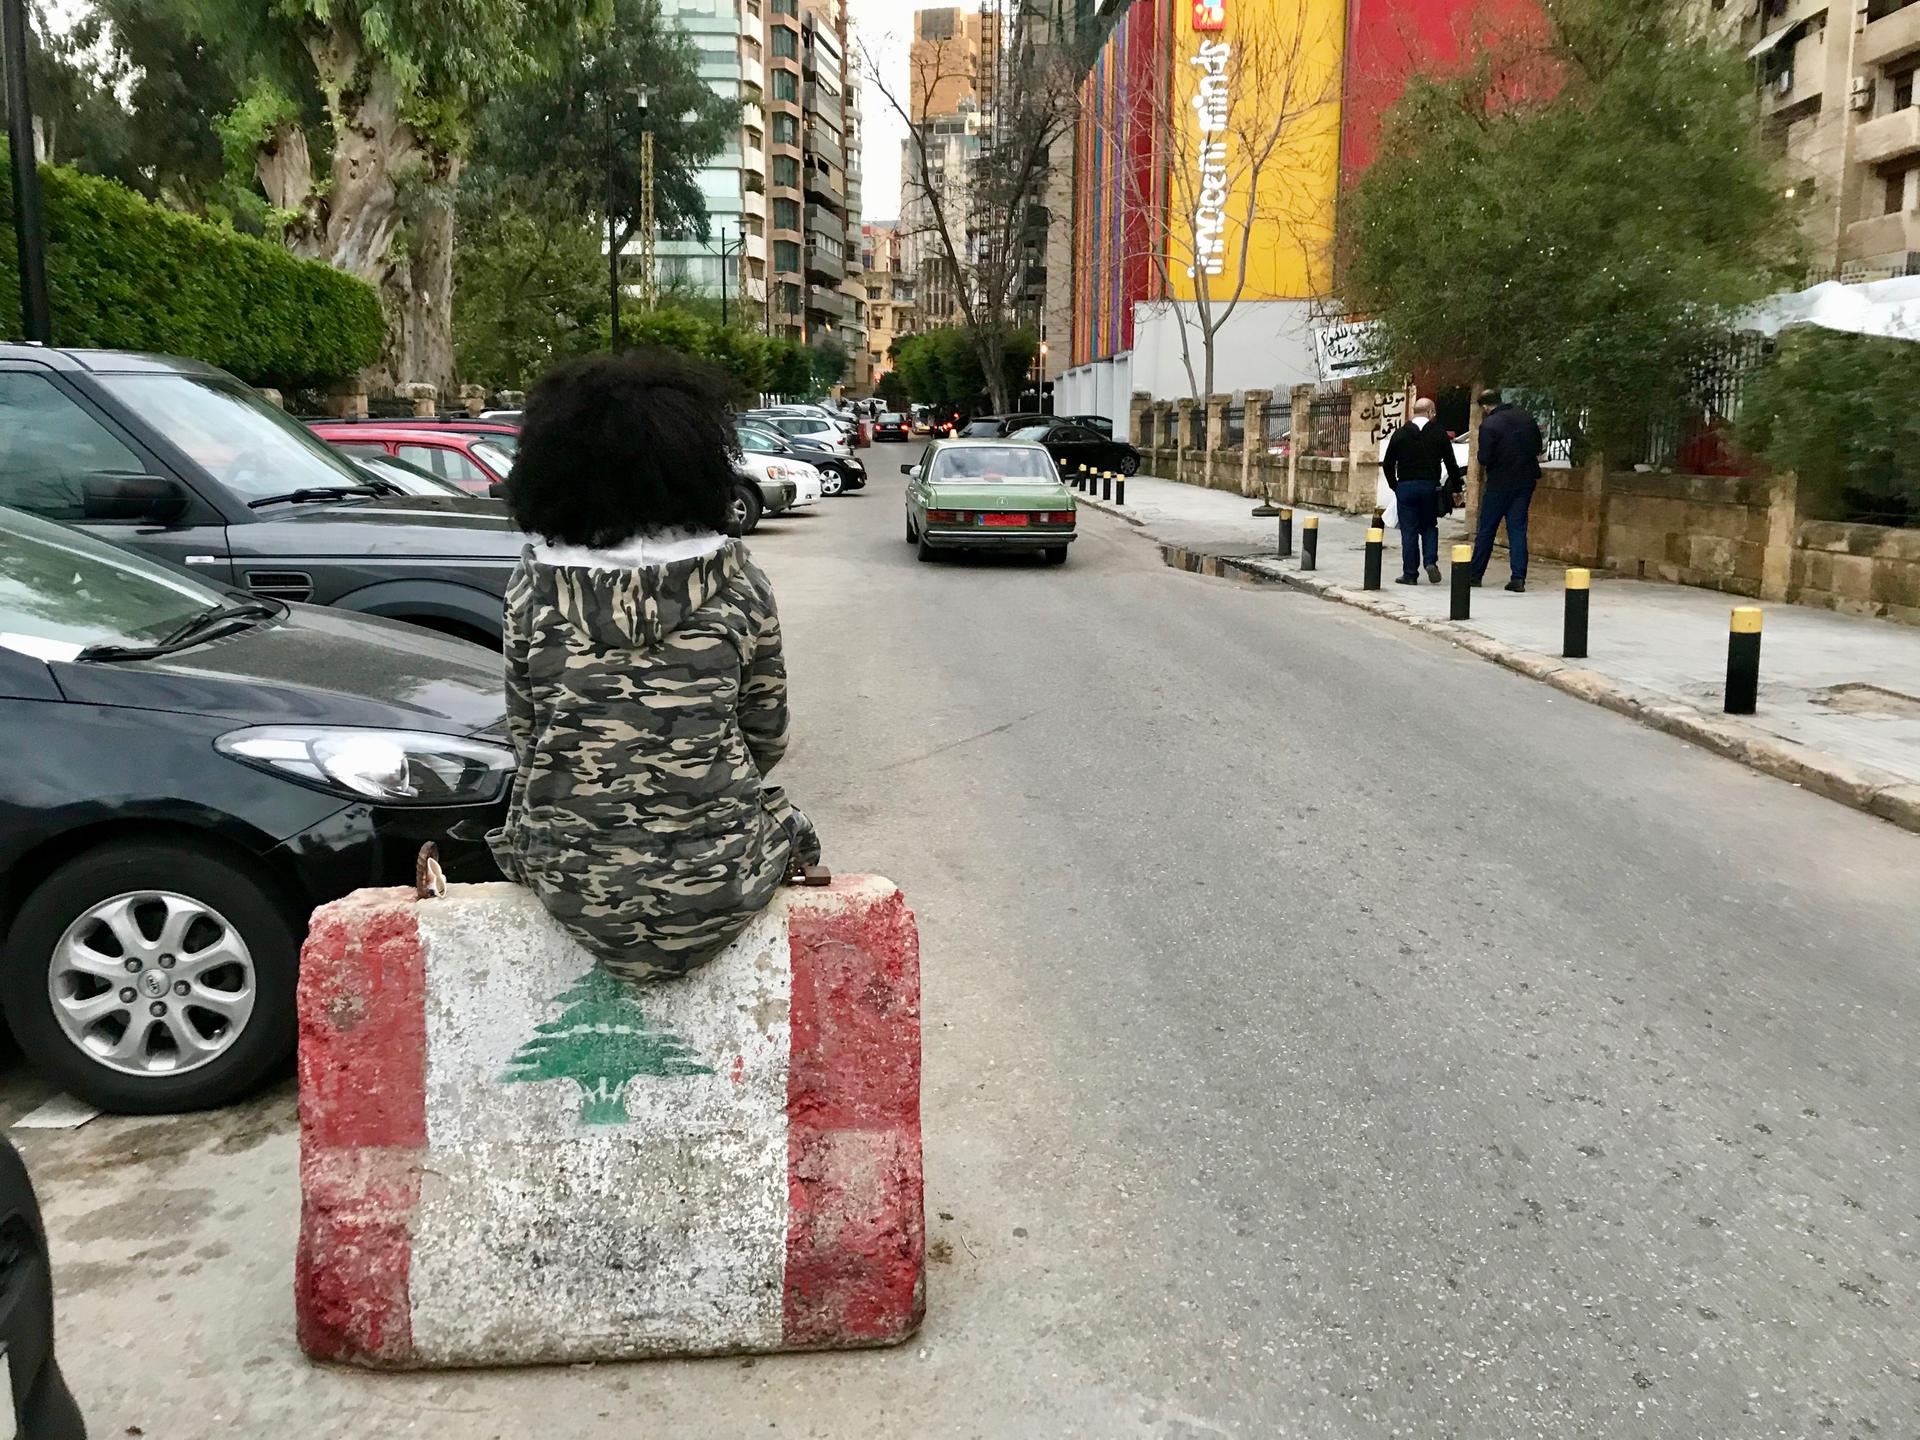 A young woman wearing a camouflage jacket sits on a barricade in middle of street.